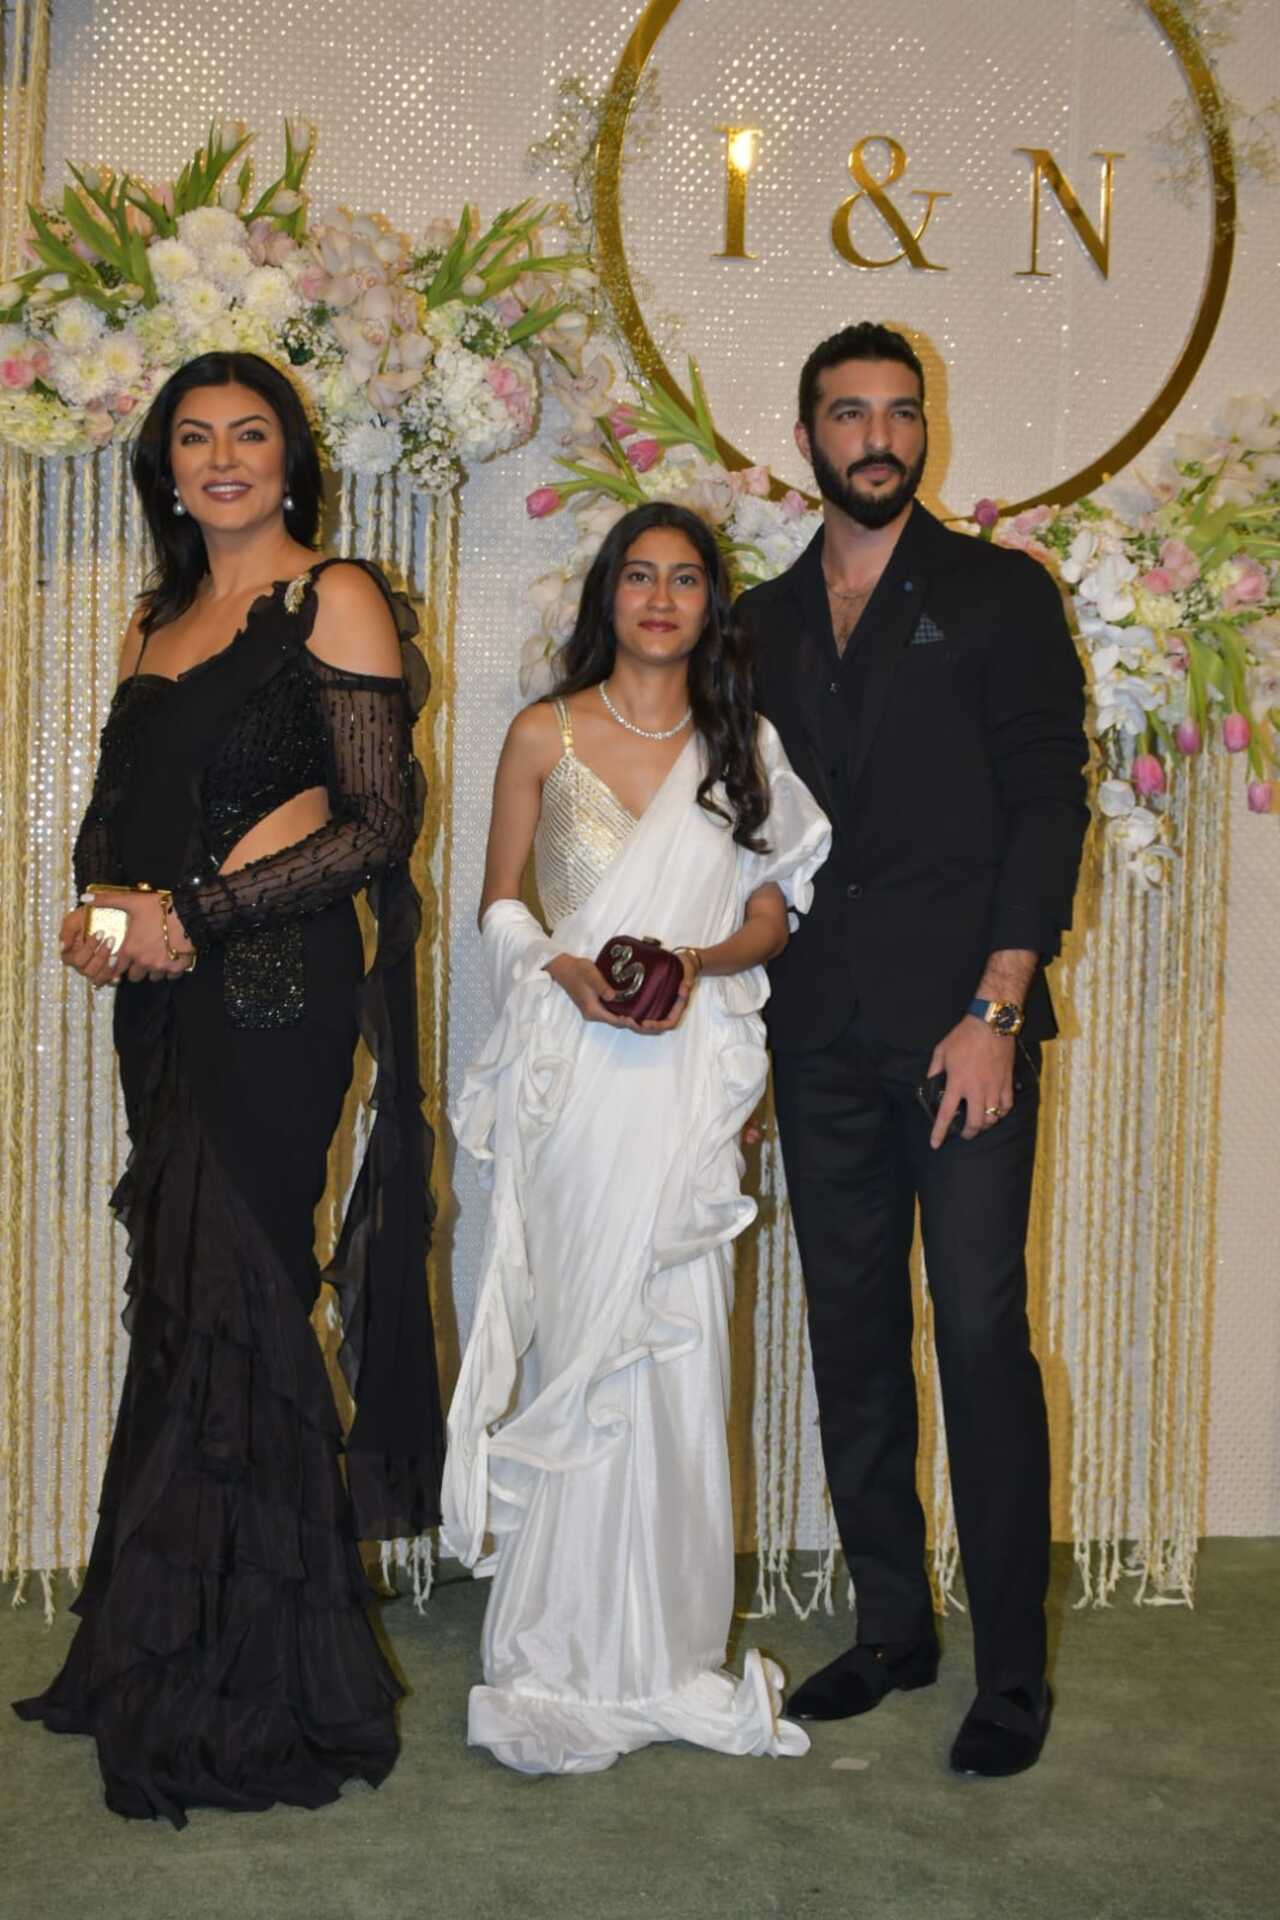 Sushmita Sen and her daughter Renee wore ruffled sarees for the wedding night. While Sushmita opted for an all-black saree, daughter Renee was seen in an all-white saree. Sen's boyfriend Rohman Shawl was also present at the reception